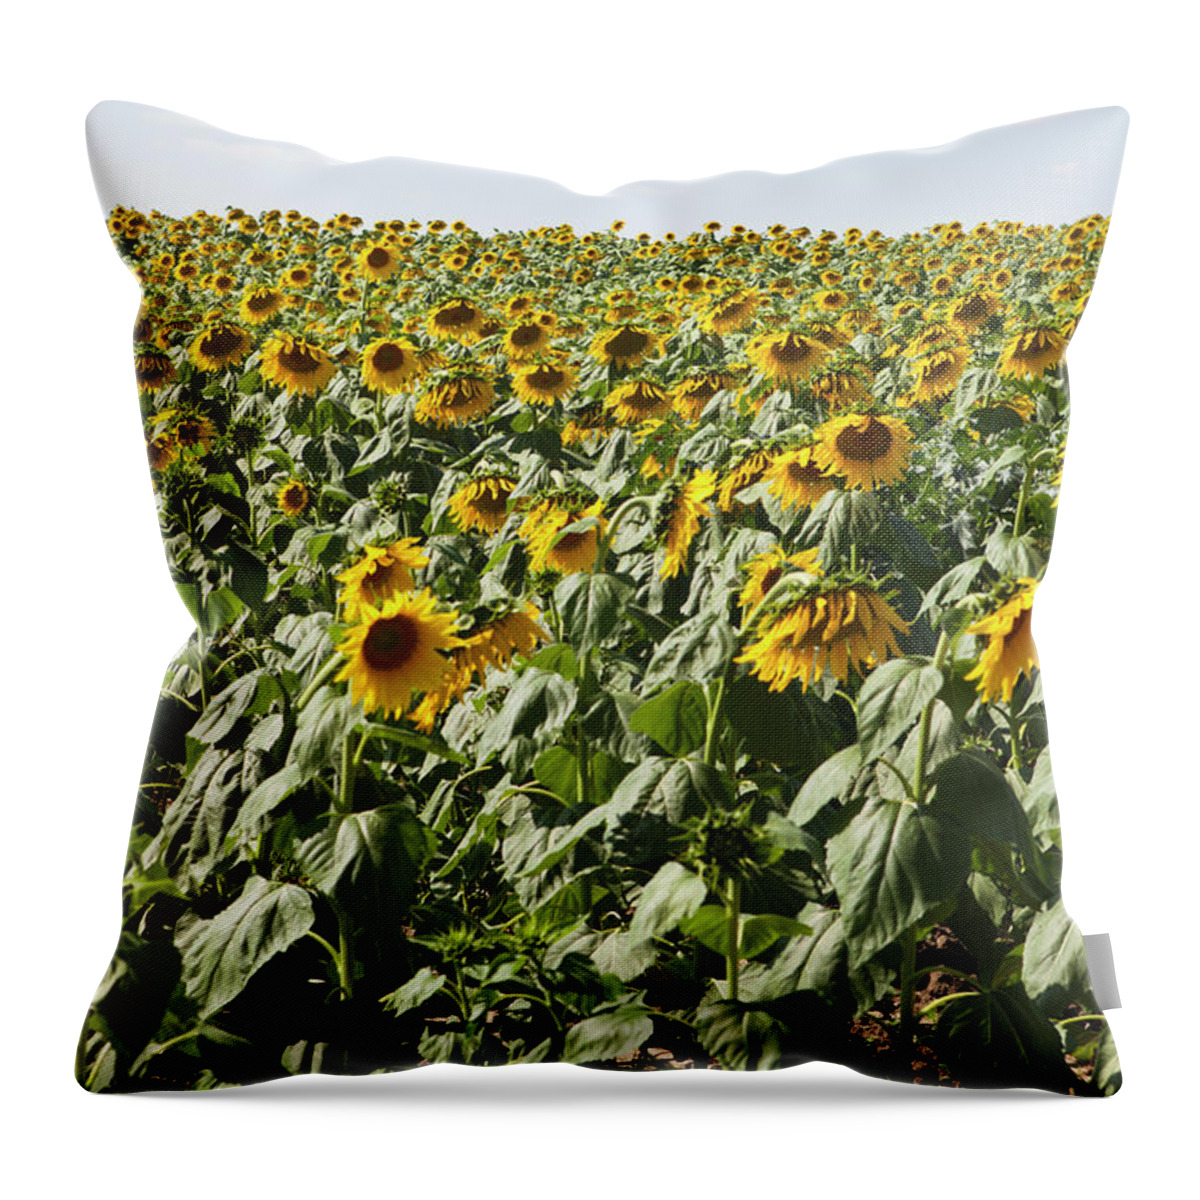 Scenics Throw Pillow featuring the photograph A Field Of Cultivated Sunflowers by Sean Russell